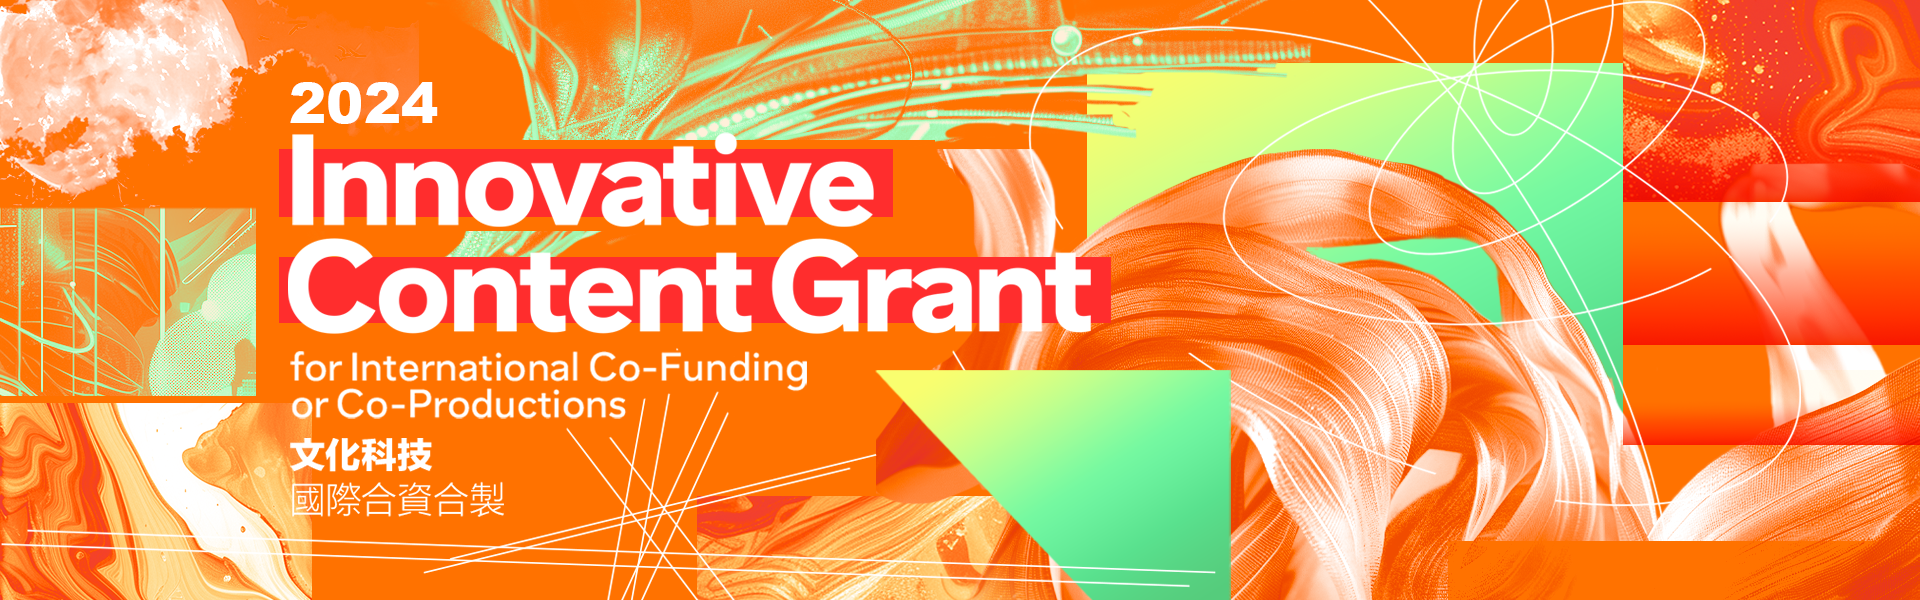 2024 Innovative Content Grant for International Co-Funding and Co-Productions is now open for application.